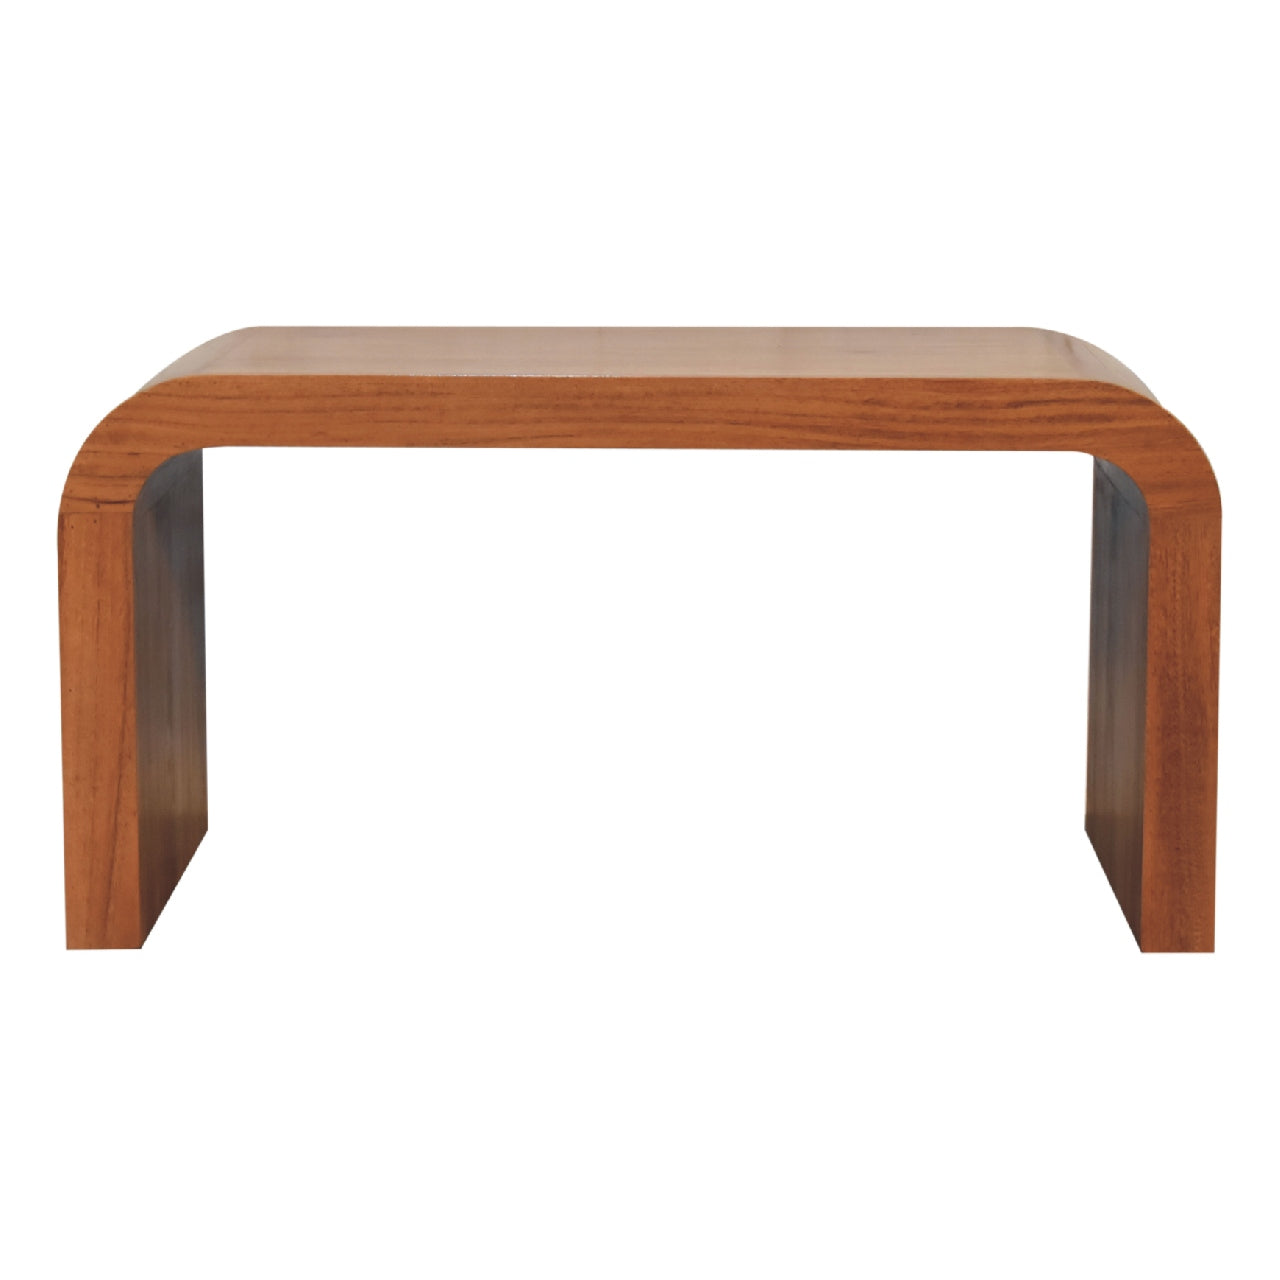 View Darcy Coffee Table information